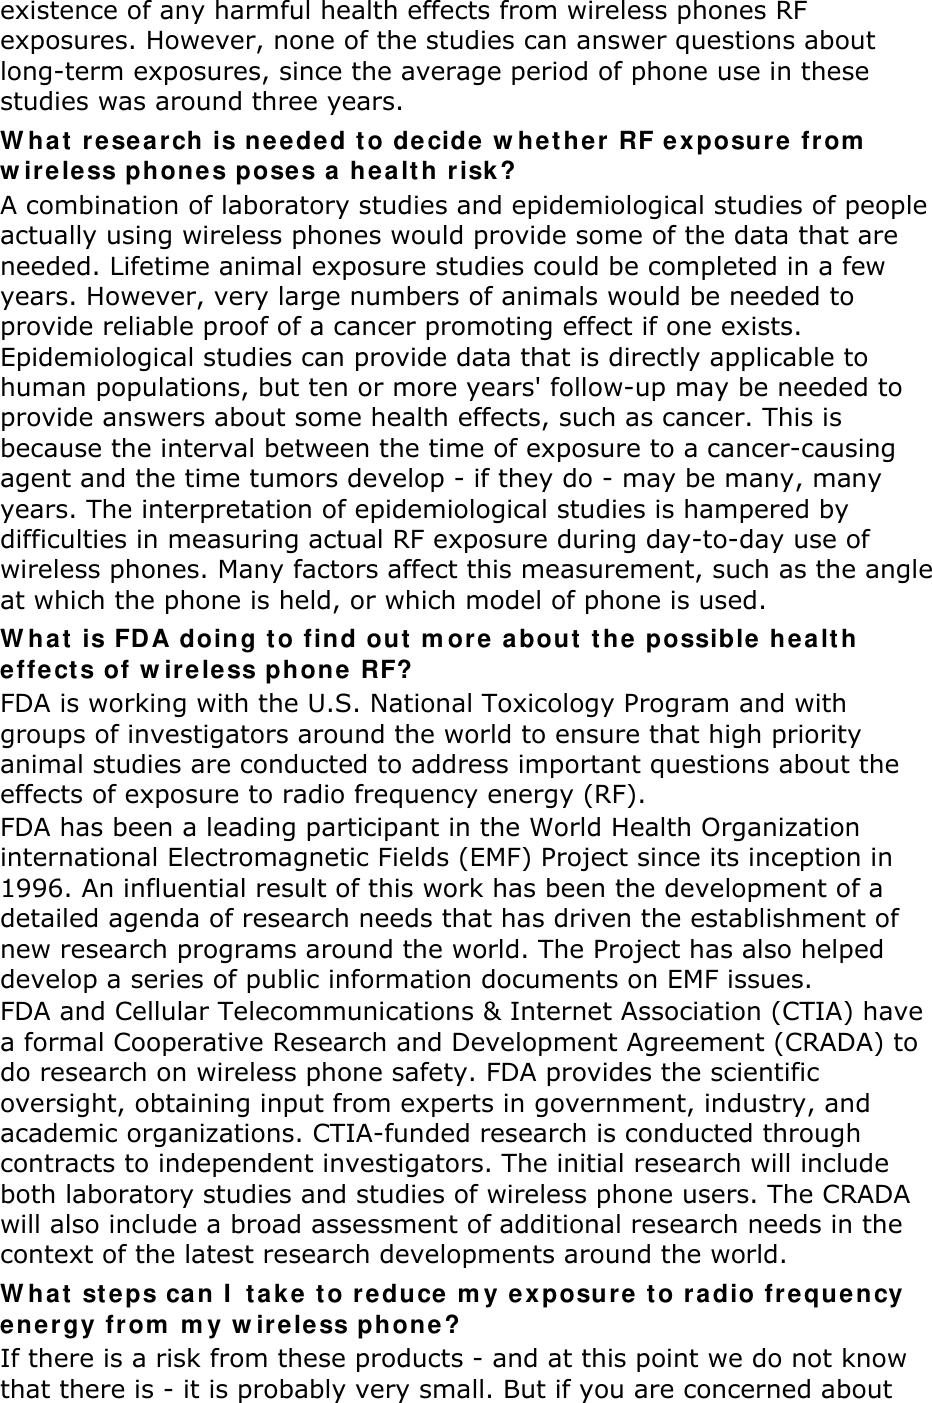 existence of any harmful health effects from wireless phones RF exposures. However, none of the studies can answer questions about long-term exposures, since the average period of phone use in these studies was around three years. W hat  rese a rch is ne e ded t o de cide  w h e t her RF ex posur e  from  w irele ss phones poses a hea lth r isk ? A combination of laboratory studies and epidemiological studies of people actually using wireless phones would provide some of the data that are needed. Lifetime animal exposure studies could be completed in a few years. However, very large numbers of animals would be needed to provide reliable proof of a cancer promoting effect if one exists. Epidemiological studies can provide data that is directly applicable to human populations, but ten or more years&apos; follow-up may be needed to provide answers about some health effects, such as cancer. This is because the interval between the time of exposure to a cancer-causing agent and the time tumors develop - if they do - may be many, many years. The interpretation of epidemiological studies is hampered by difficulties in measuring actual RF exposure during day-to-day use of wireless phones. Many factors affect this measurement, such as the angle at which the phone is held, or which model of phone is used. W hat  is FD A doing t o find out  m ore a bout  t he  possible  he a lt h effe ct s of w ir e less phone  RF? FDA is working with the U.S. National Toxicology Program and with groups of investigators around the world to ensure that high priority animal studies are conducted to address important questions about the effects of exposure to radio frequency energy (RF). FDA has been a leading participant in the World Health Organization international Electromagnetic Fields (EMF) Project since its inception in 1996. An influential result of this work has been the development of a detailed agenda of research needs that has driven the establishment of new research programs around the world. The Project has also helped develop a series of public information documents on EMF issues. FDA and Cellular Telecommunications &amp; Internet Association (CTIA) have a formal Cooperative Research and Development Agreement (CRADA) to do research on wireless phone safety. FDA provides the scientific oversight, obtaining input from experts in government, industry, and academic organizations. CTIA-funded research is conducted through contracts to independent investigators. The initial research will include both laboratory studies and studies of wireless phone users. The CRADA will also include a broad assessment of additional research needs in the context of the latest research developments around the world. W hat  st eps can I  t ak e  t o r e duce m y exposur e  to r a dio fr e que ncy ene r gy from  m y w ir e less phone ? If there is a risk from these products - and at this point we do not know that there is - it is probably very small. But if you are concerned about 